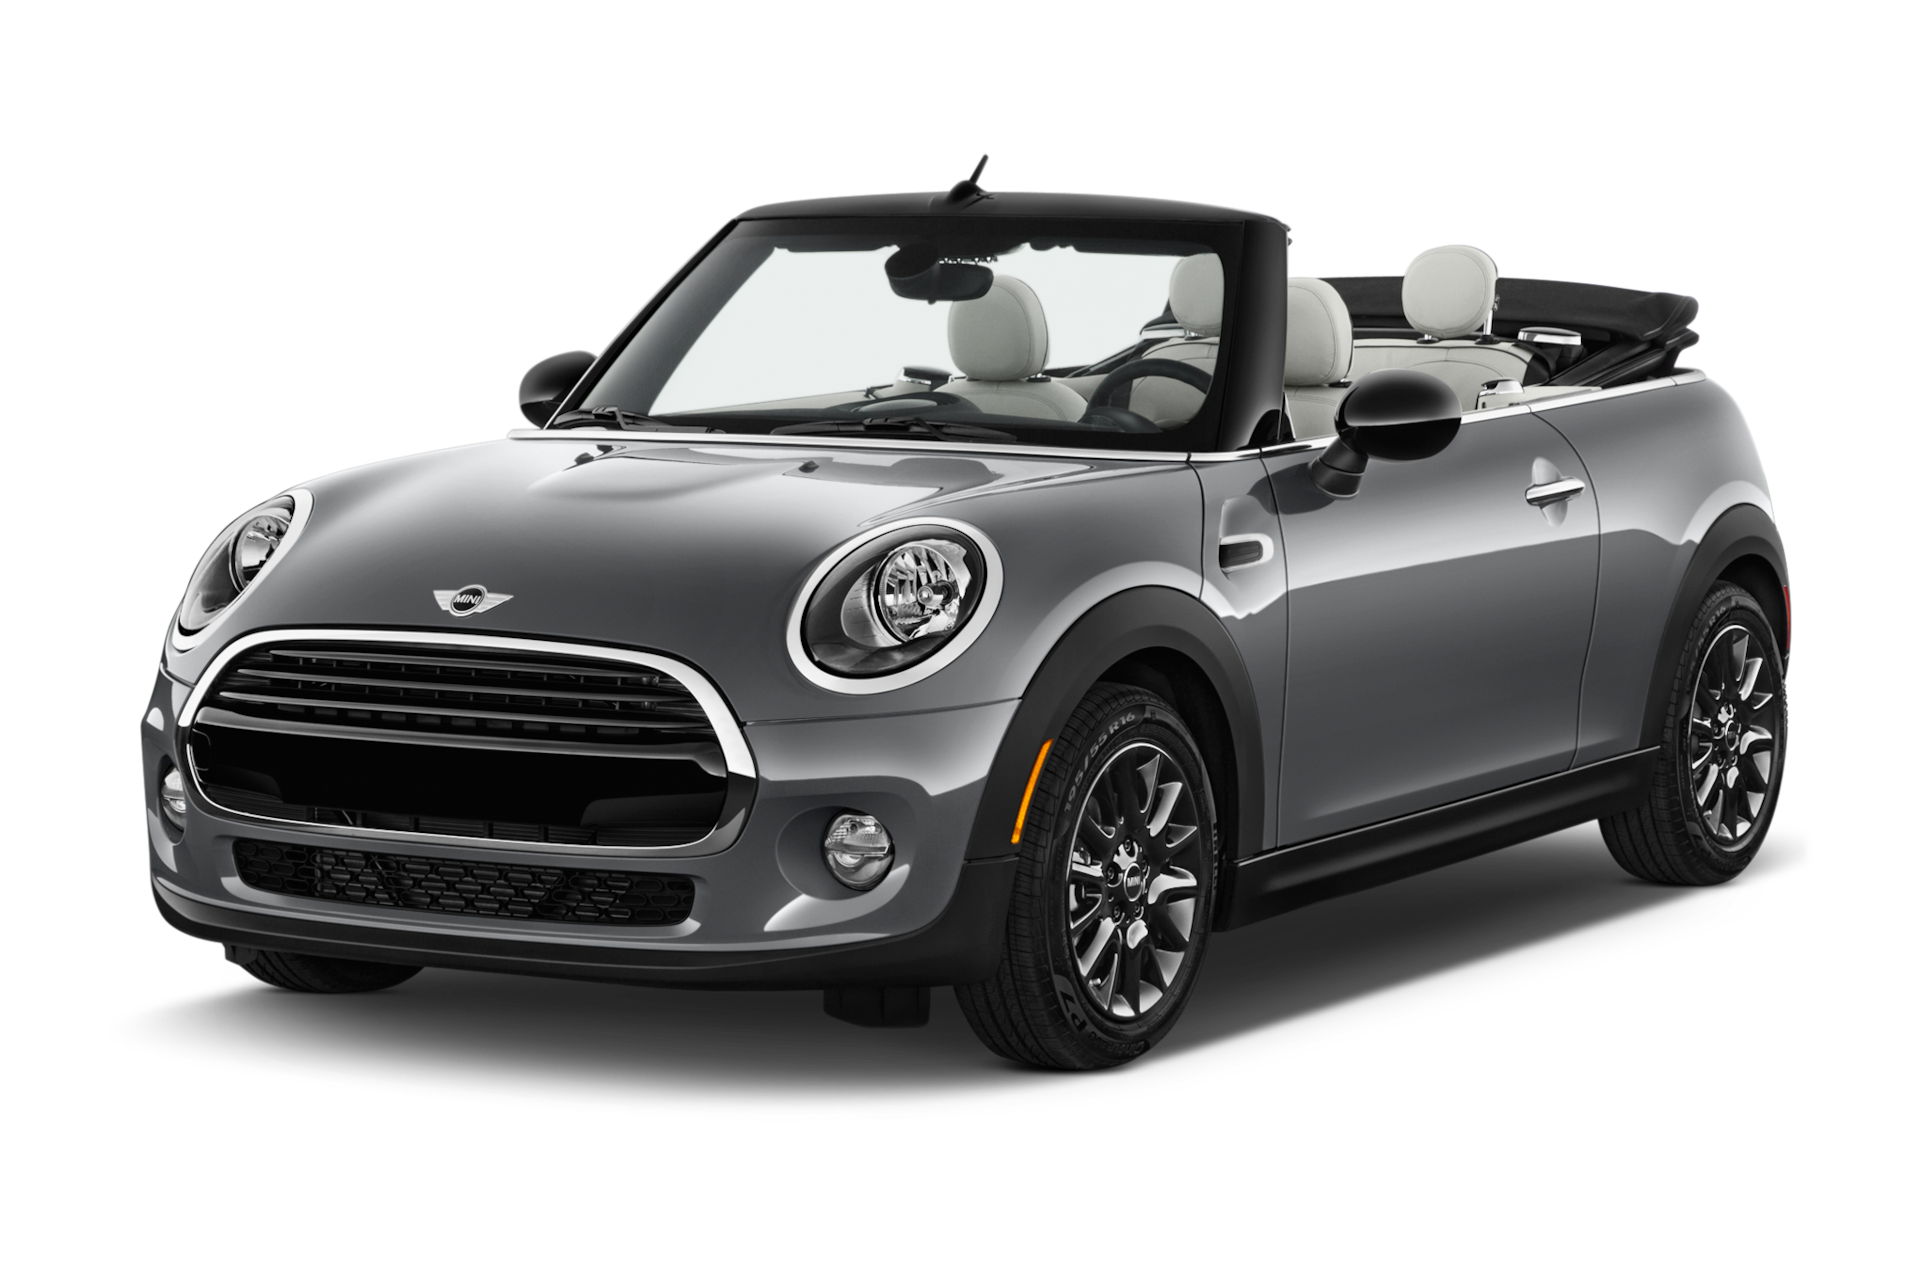 2017 MINI Convertible Prices, Reviews, and Photos - MotorTrend